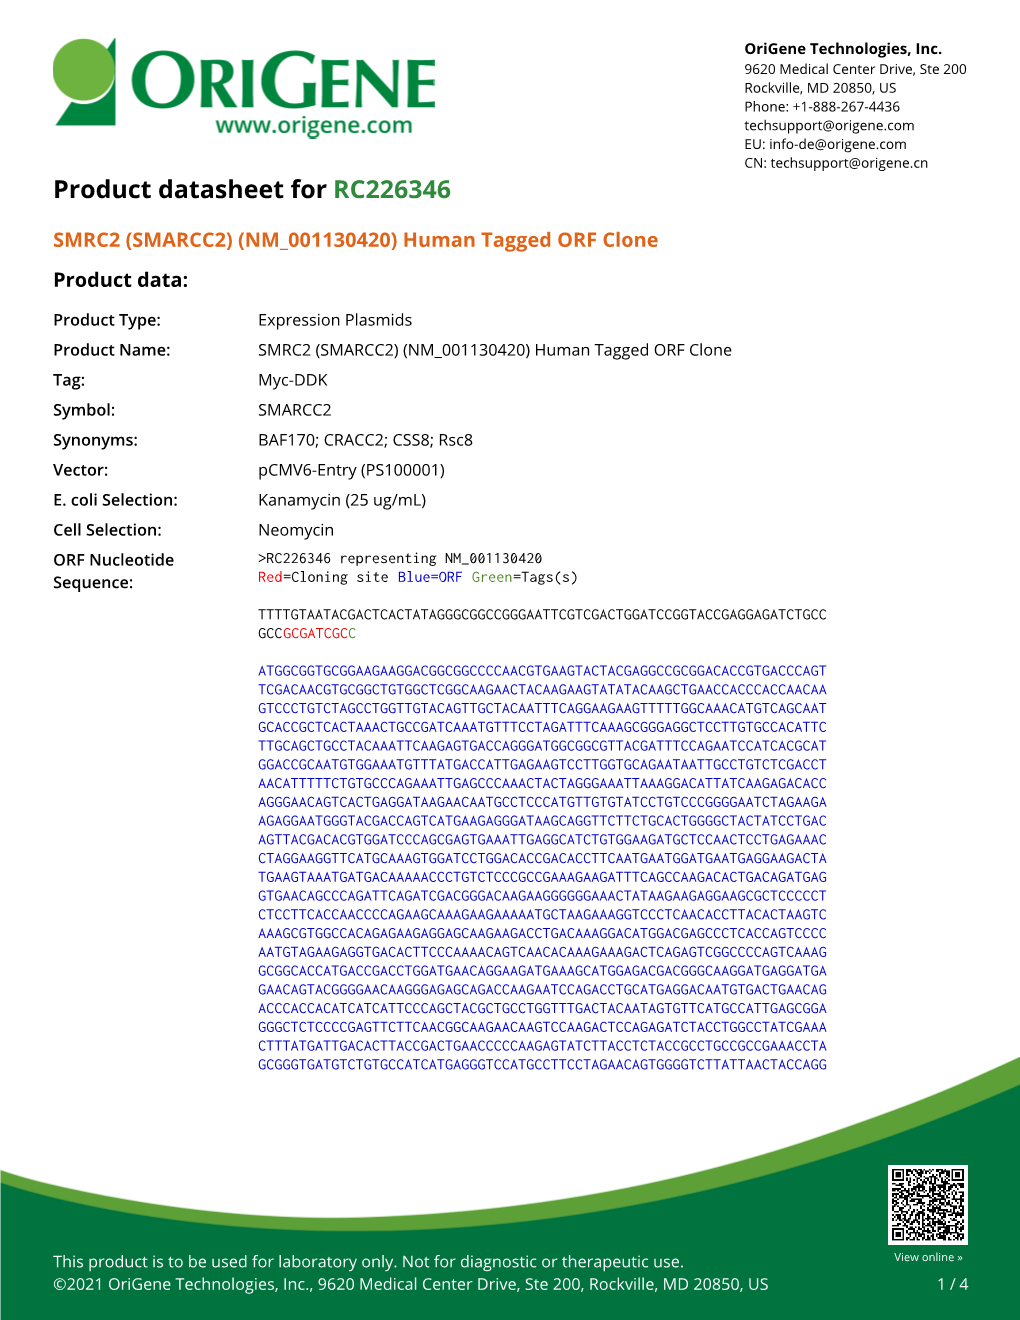 SMRC2 (SMARCC2) (NM 001130420) Human Tagged ORF Clone Product Data